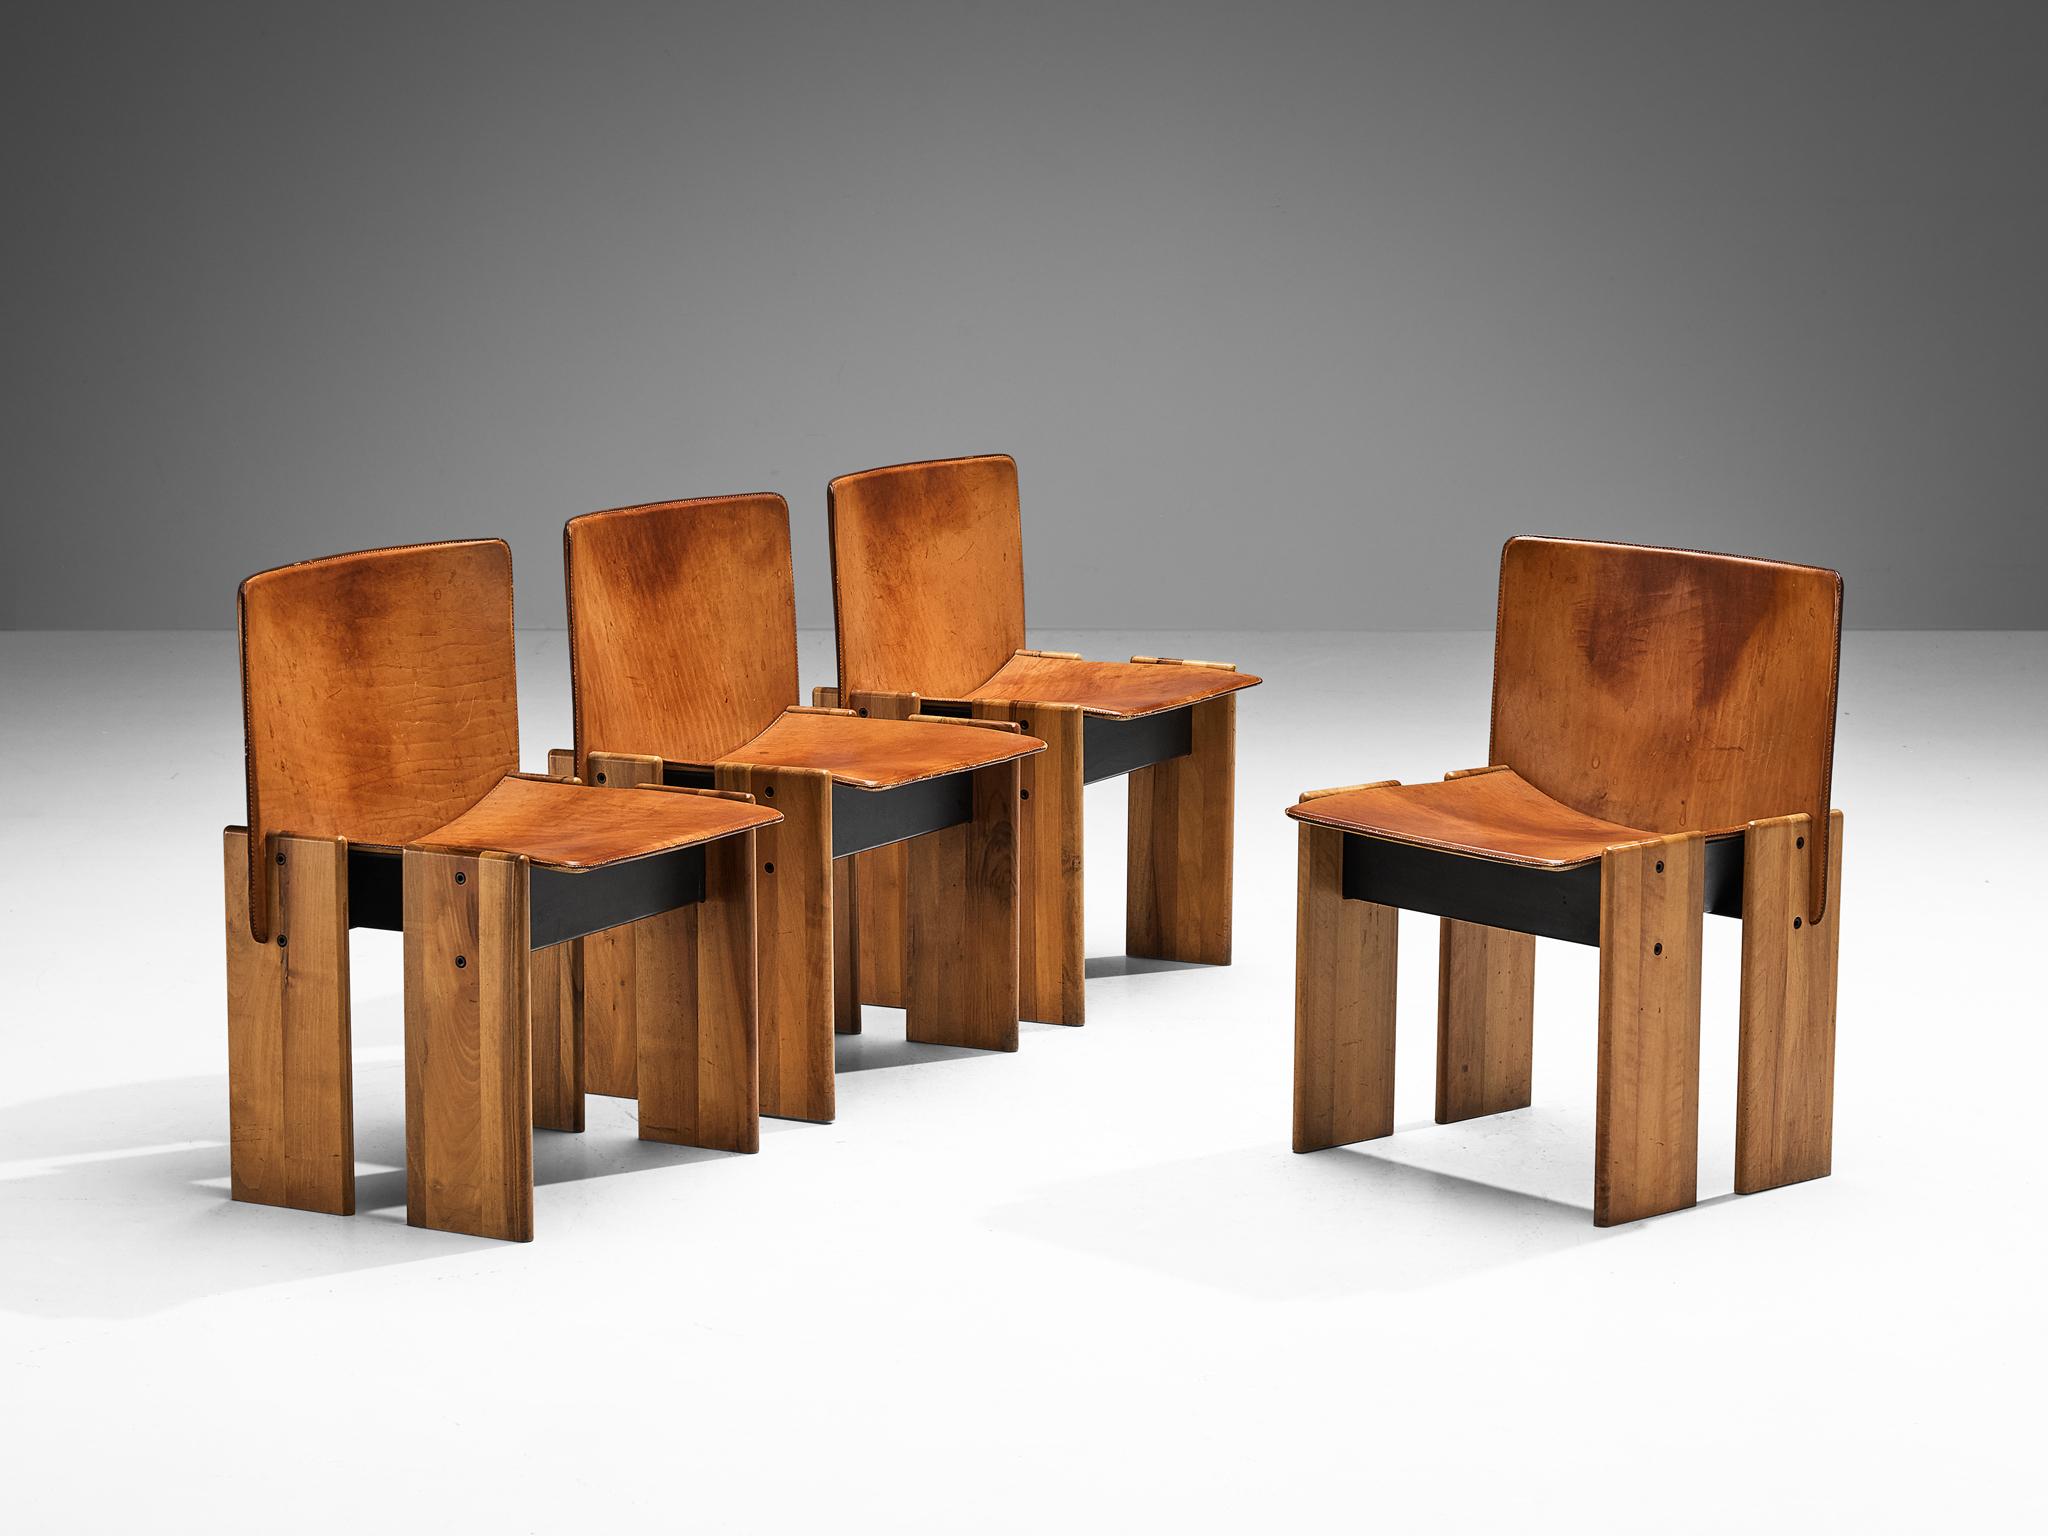 Barsacchi & Vegni Set of Four 'Avila' Dining Chairs in Walnut and Leather  1